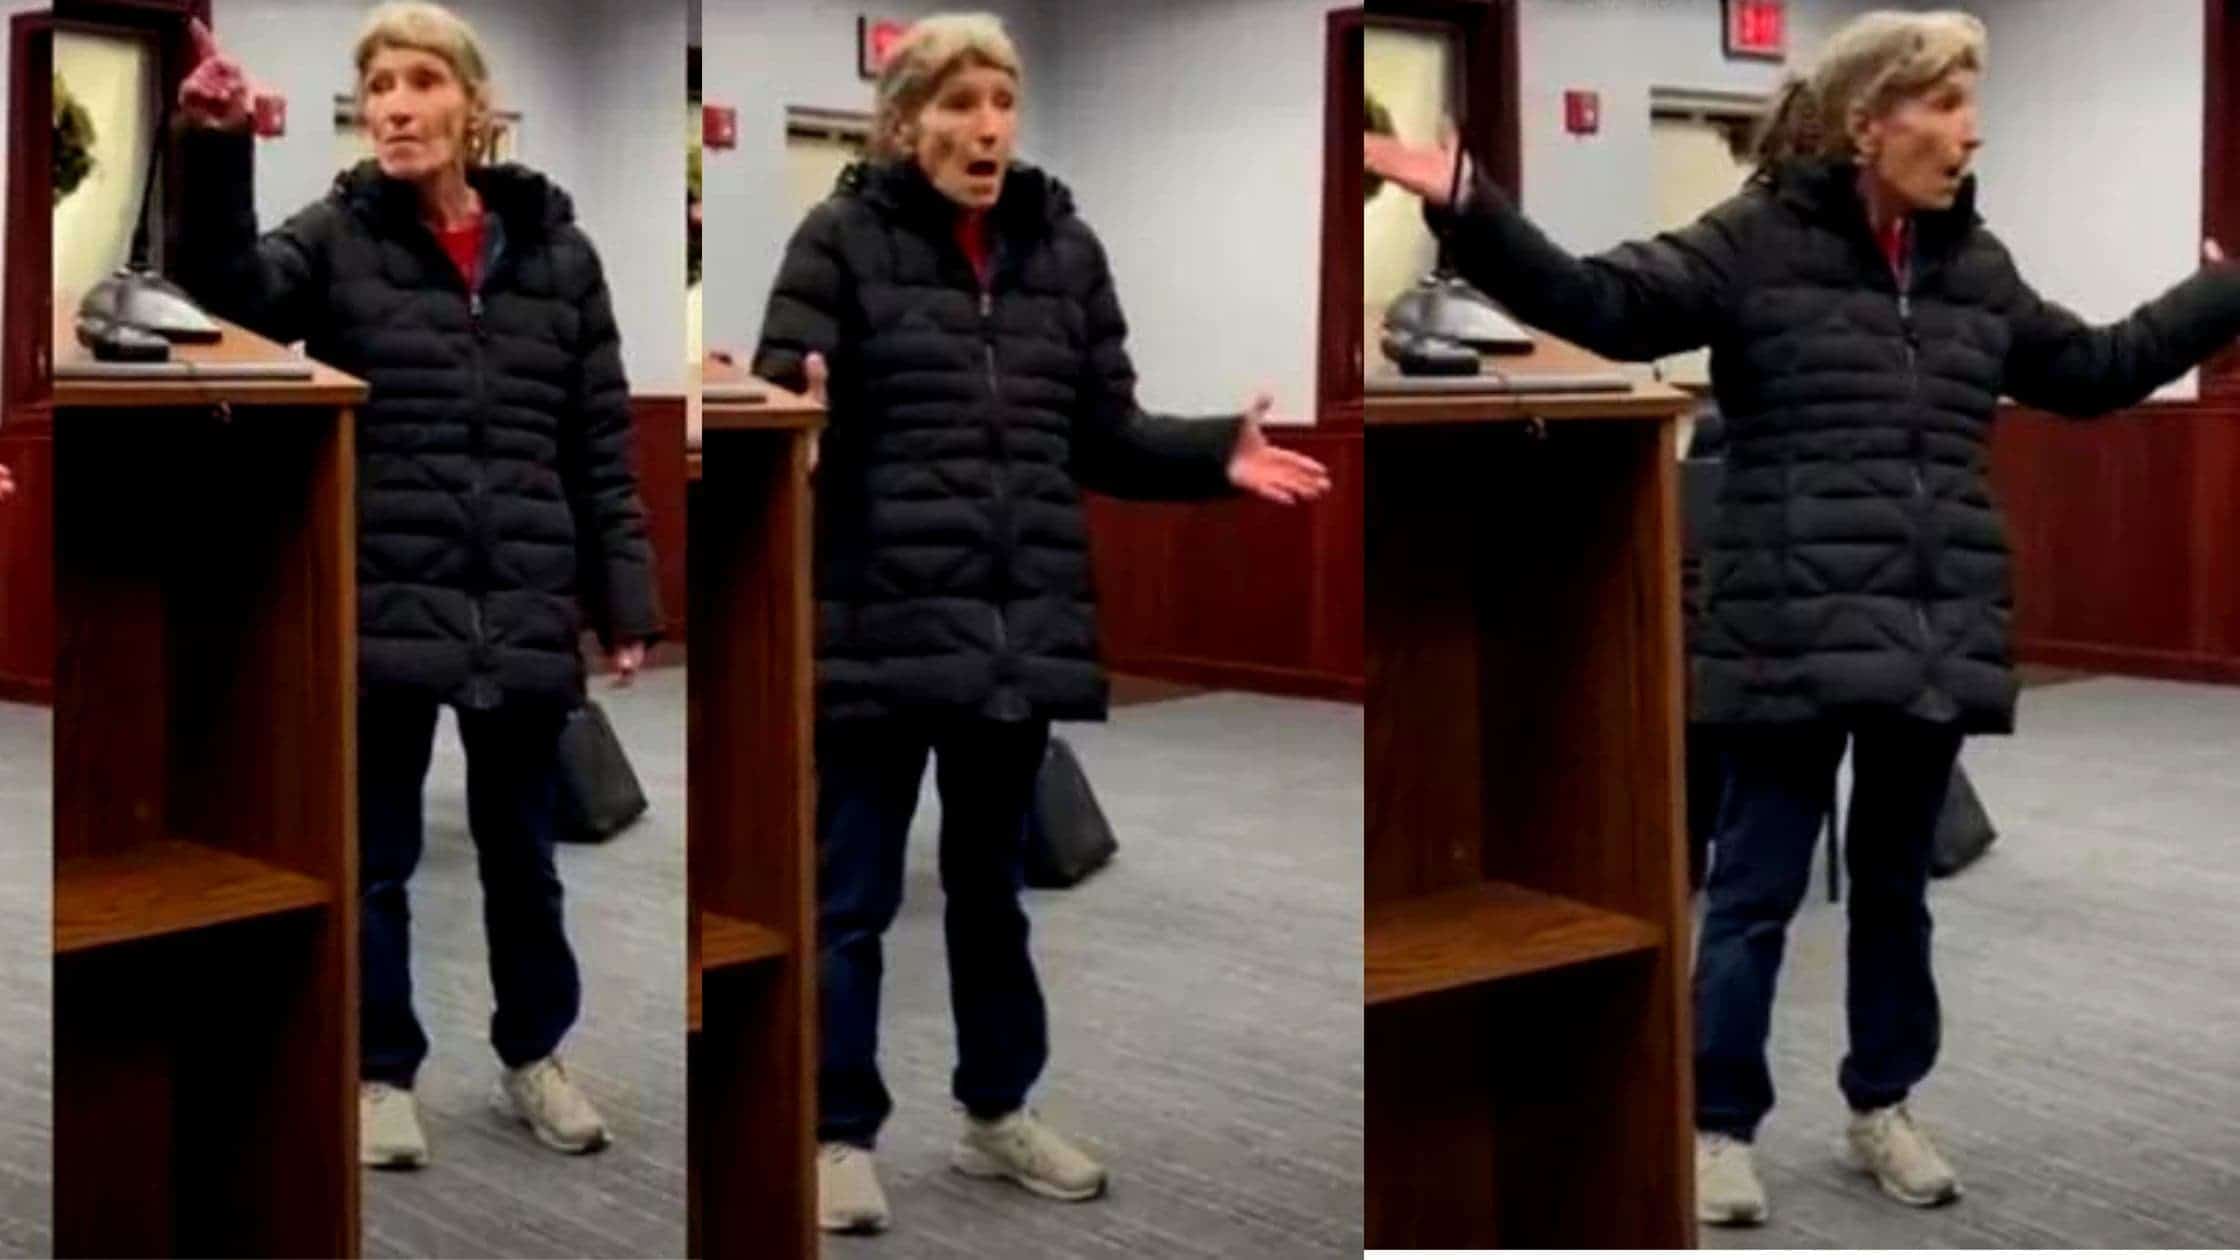 A Furious Librarian Reprimands Protesting Conservative Christians In The Library